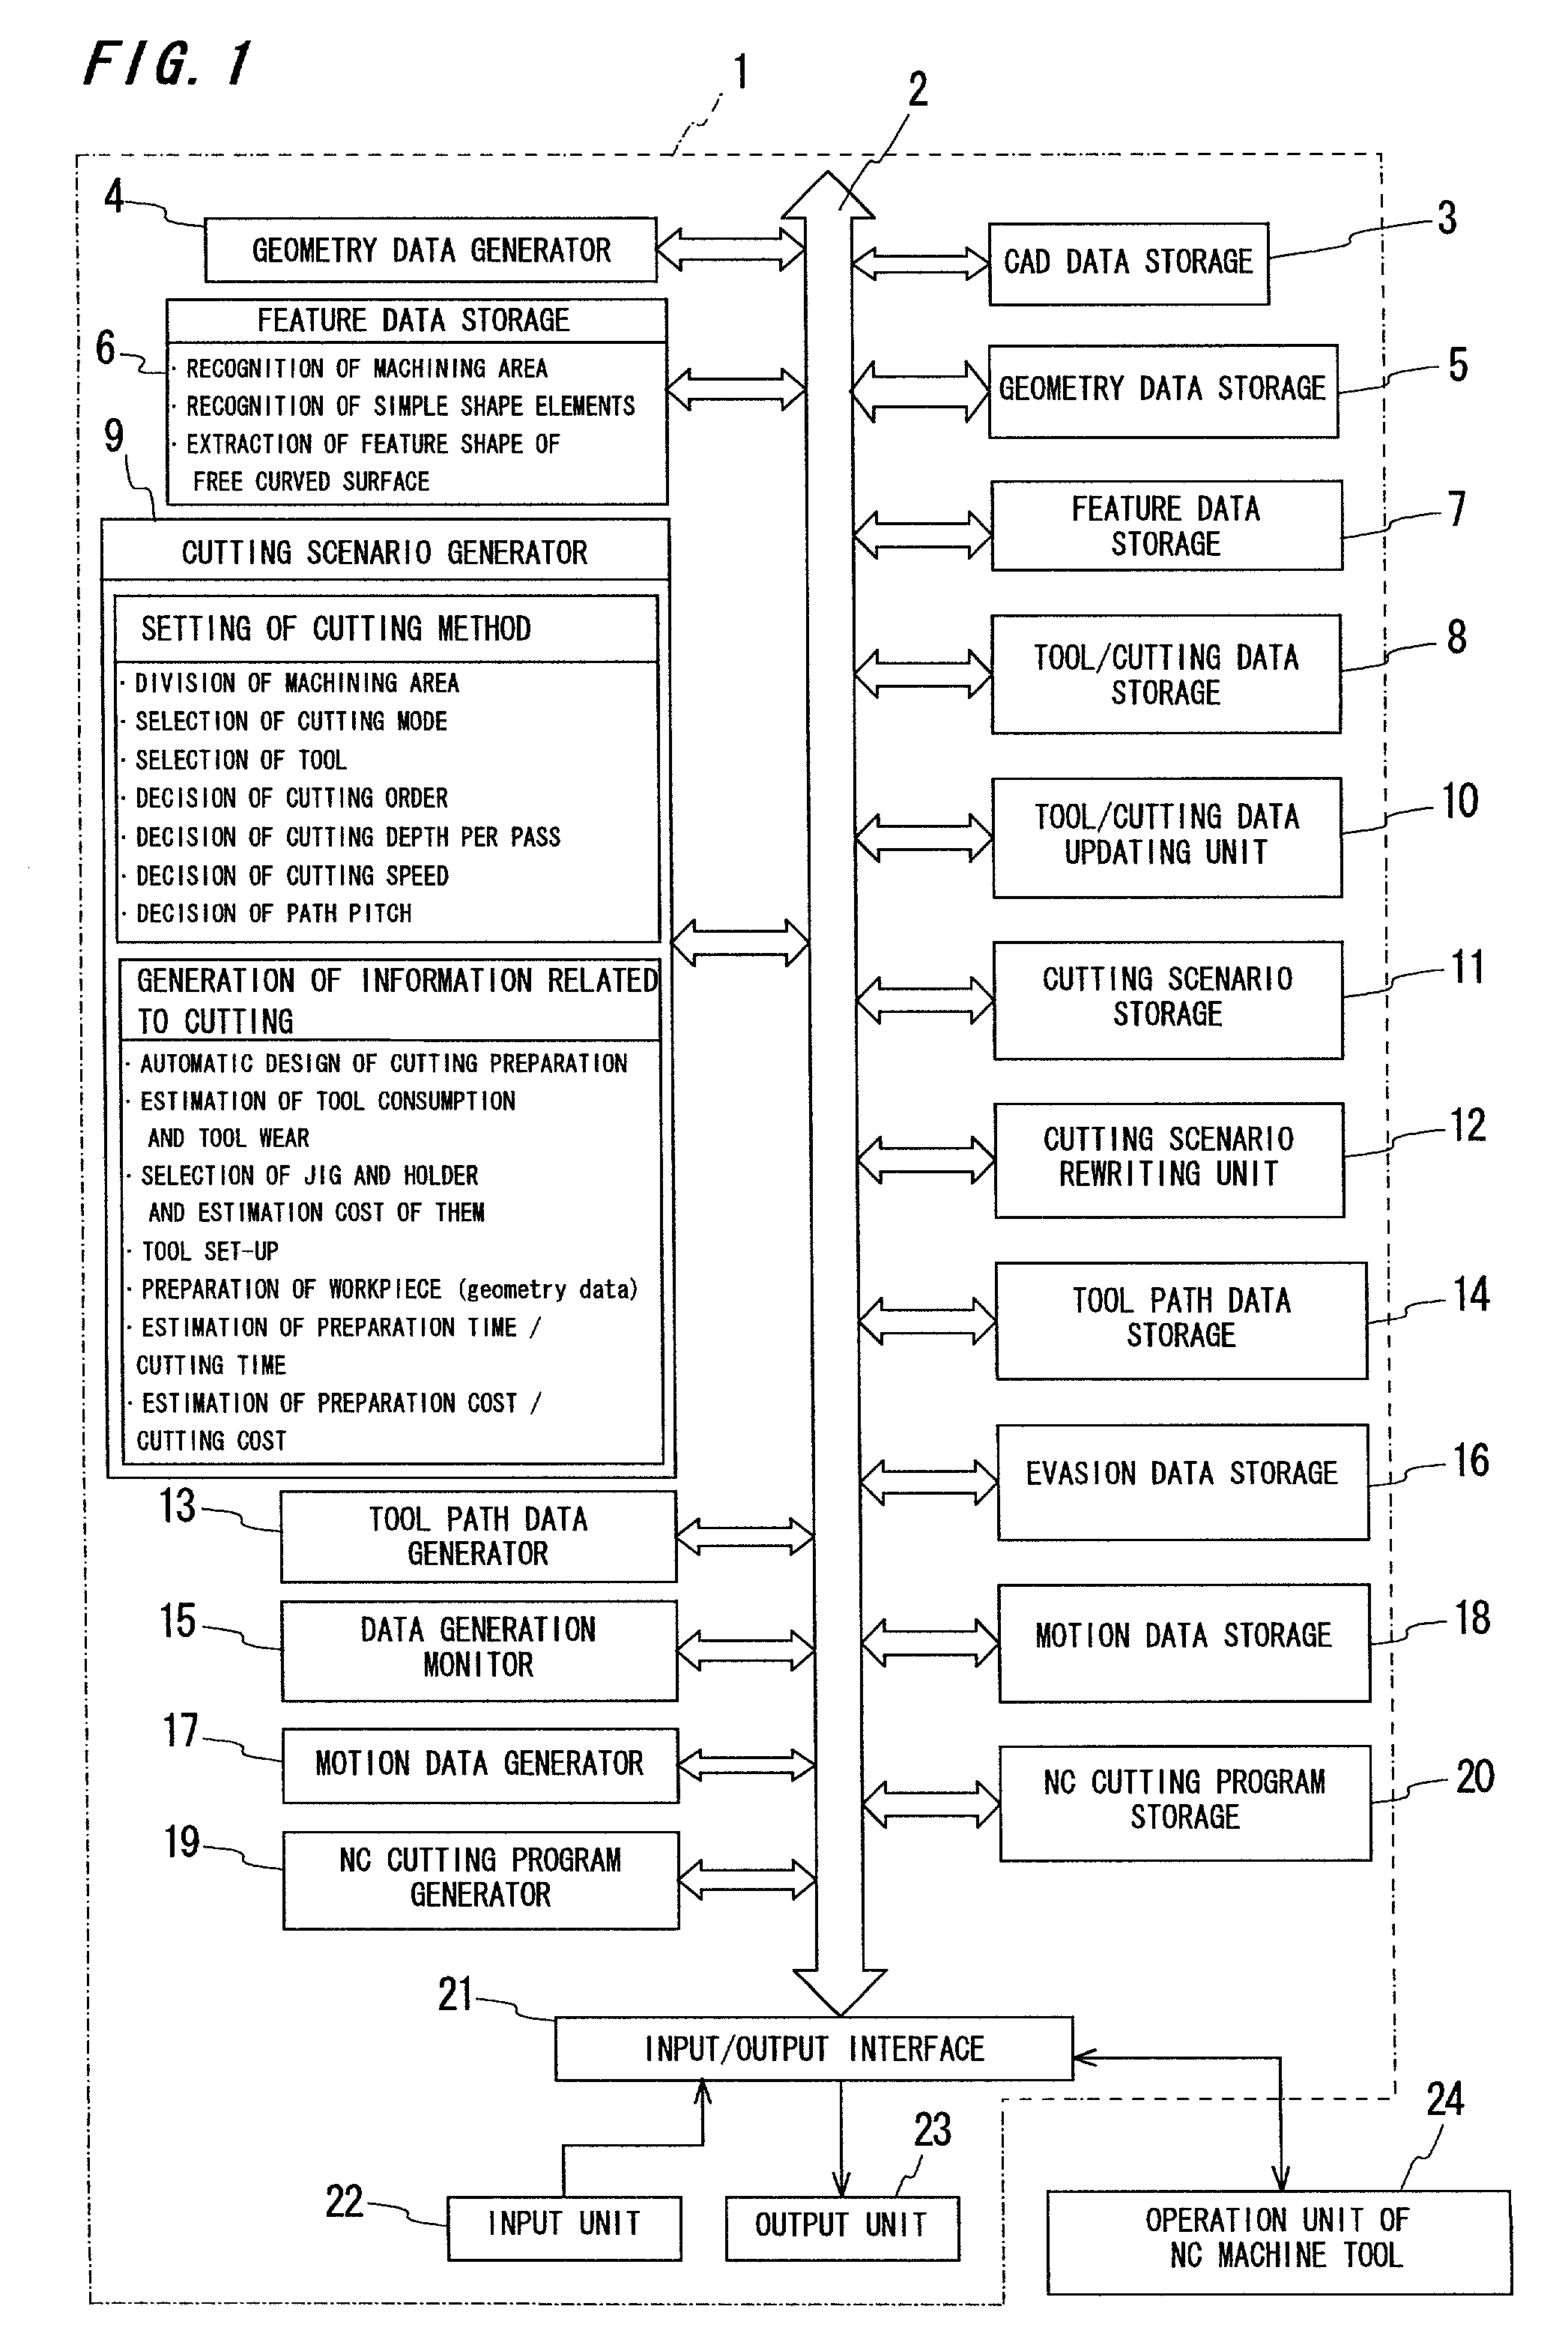 Tool path data generation apparatus for NC machine tool and numerical controller provided with it